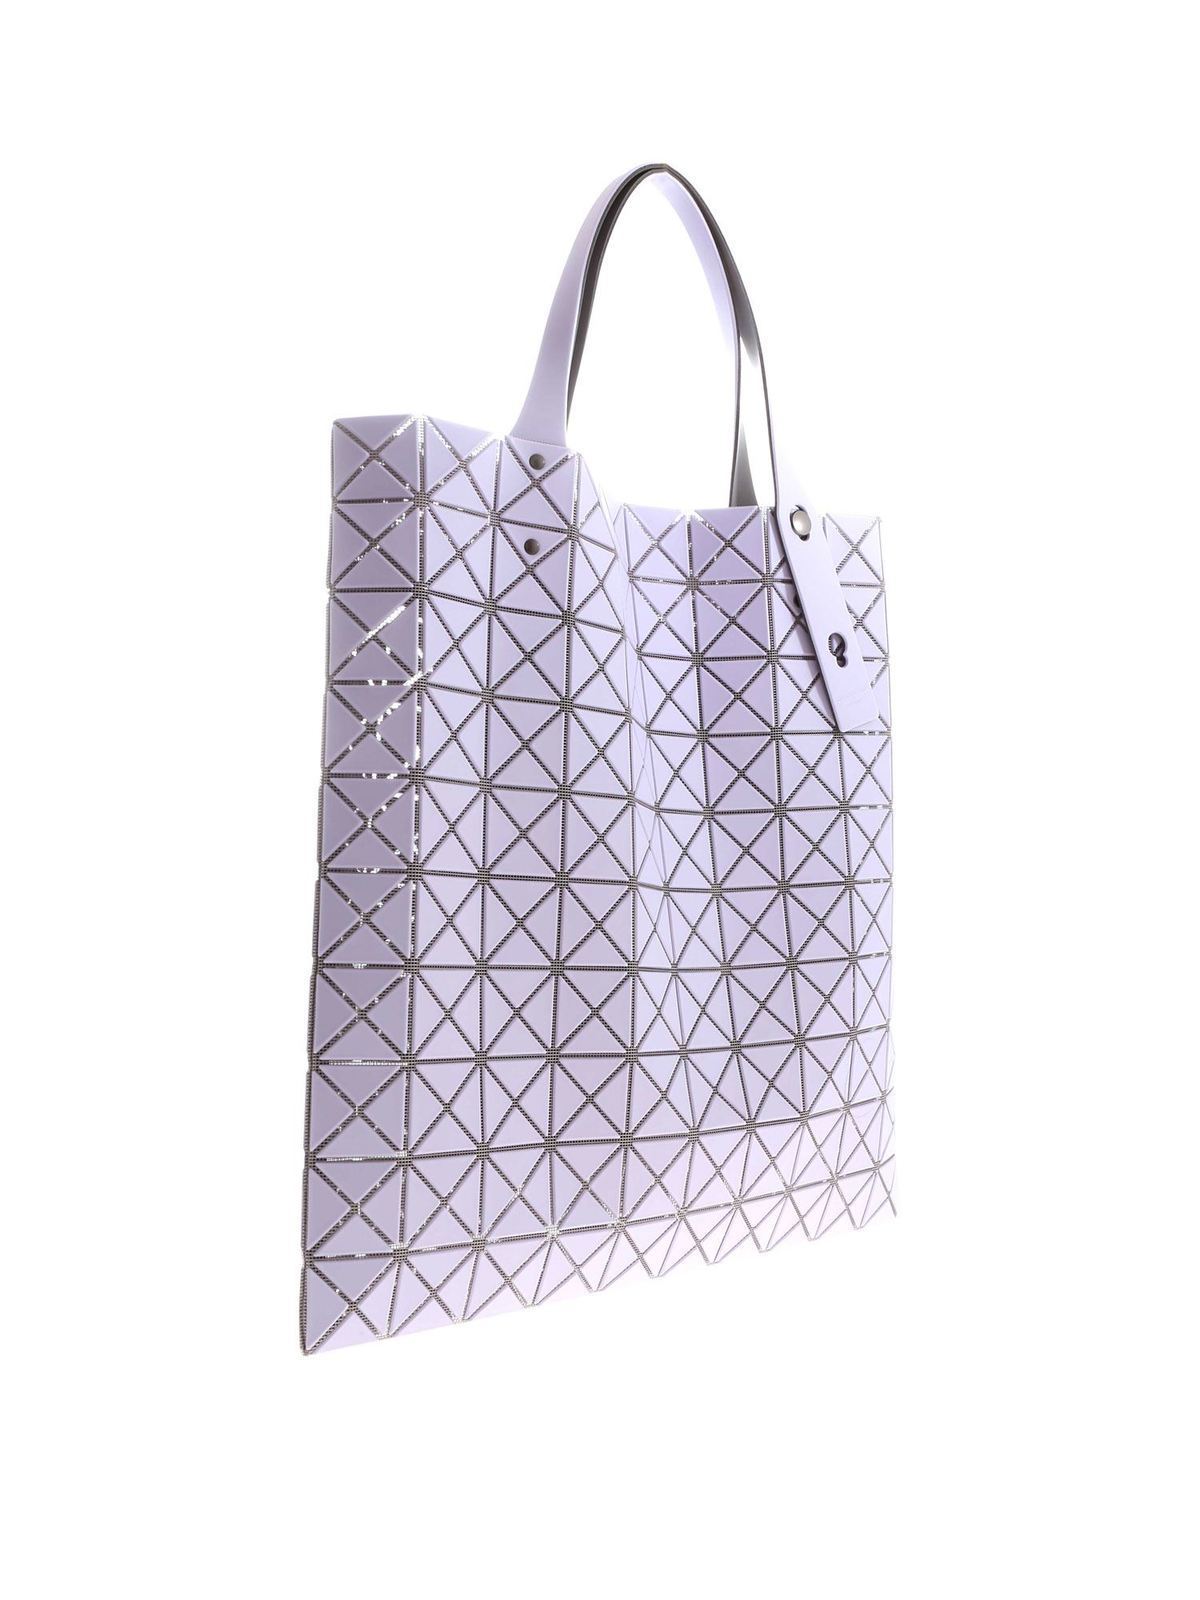 Totes bags Bao Bao Issey Miyake - Prism Frost tote in lilac